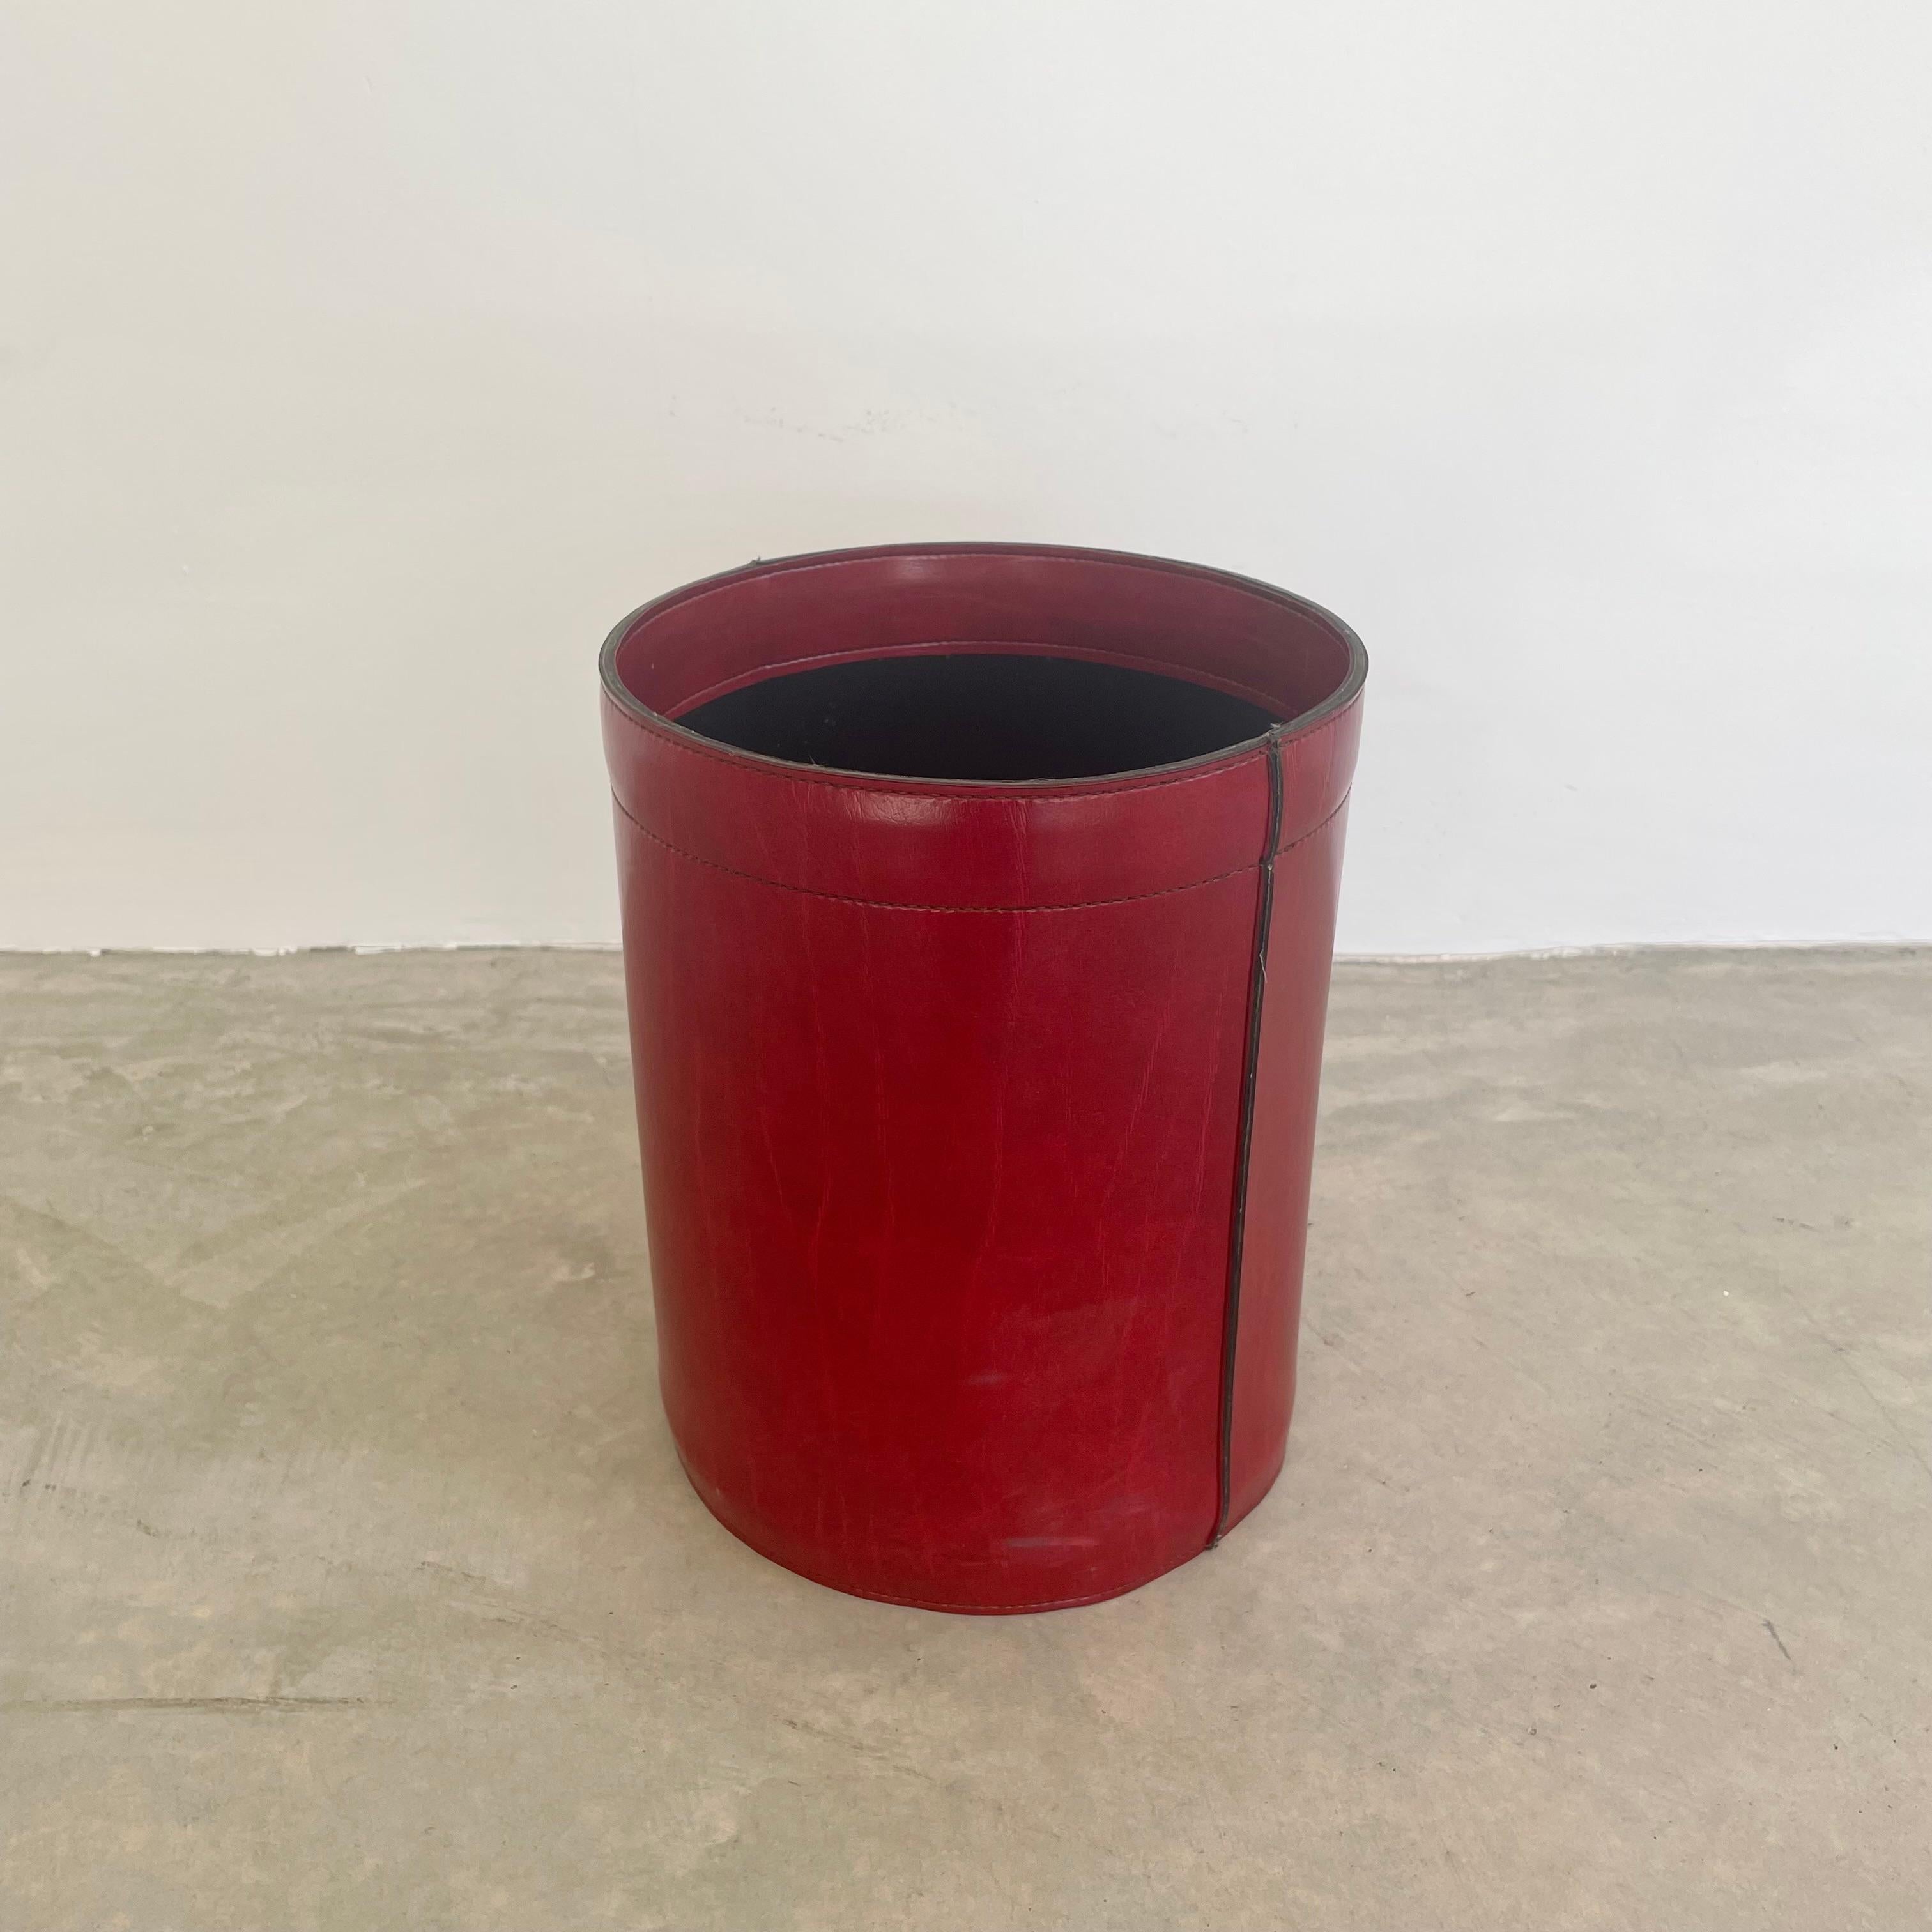 Chic red saddle leather waste bin in the style of Jacques Adnet. Circa 1960s. Handmade and hand-sewn from bordeaux red leather with a black leather interior. In good condition with nice patina on the leather. Great color and age. Staining and age as